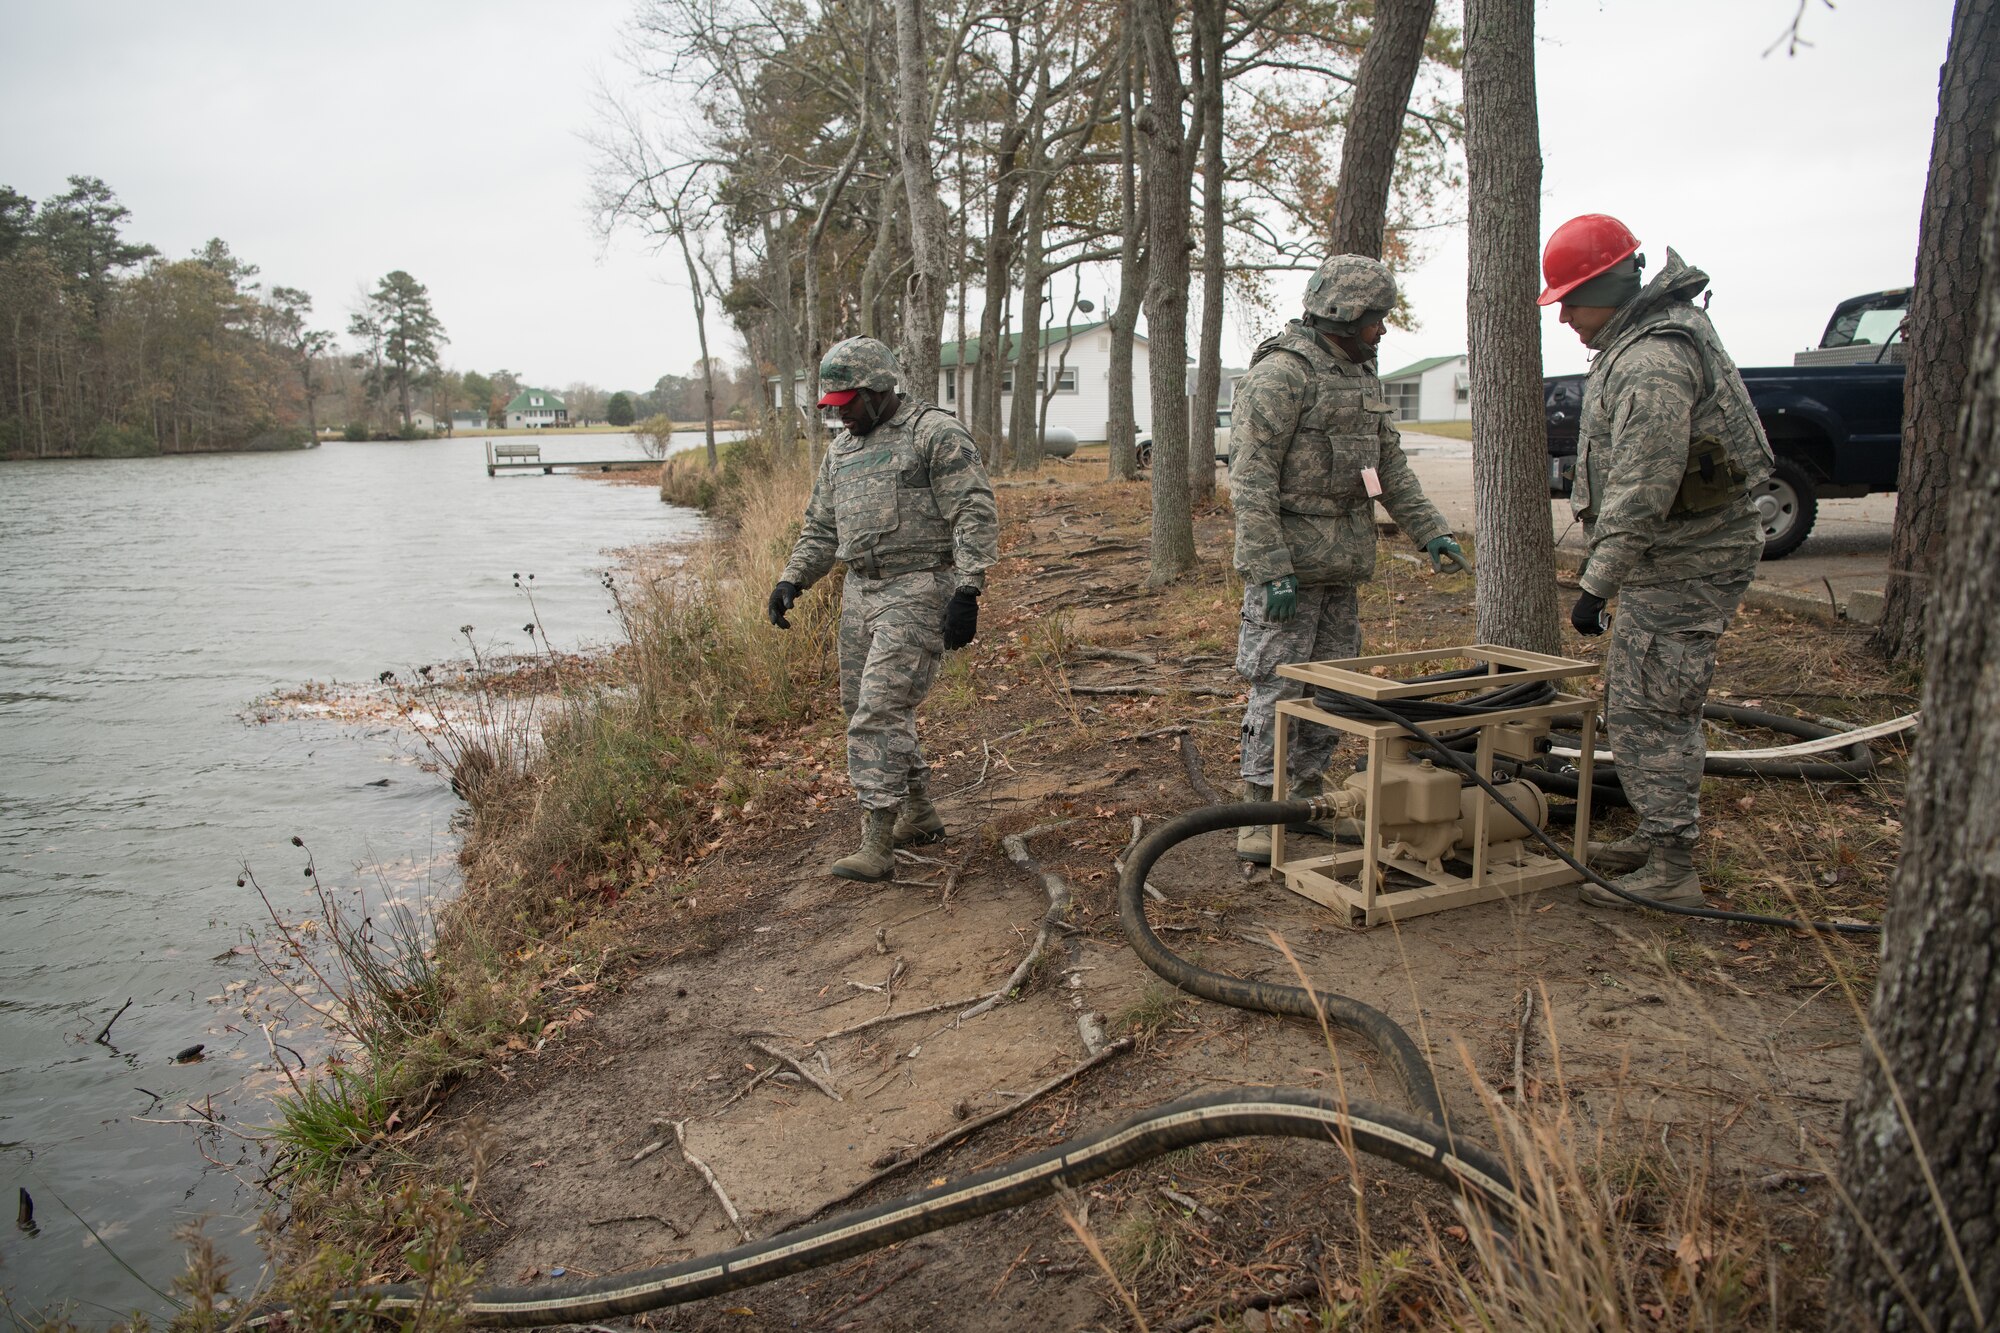 Three Airmen operate a water purification system